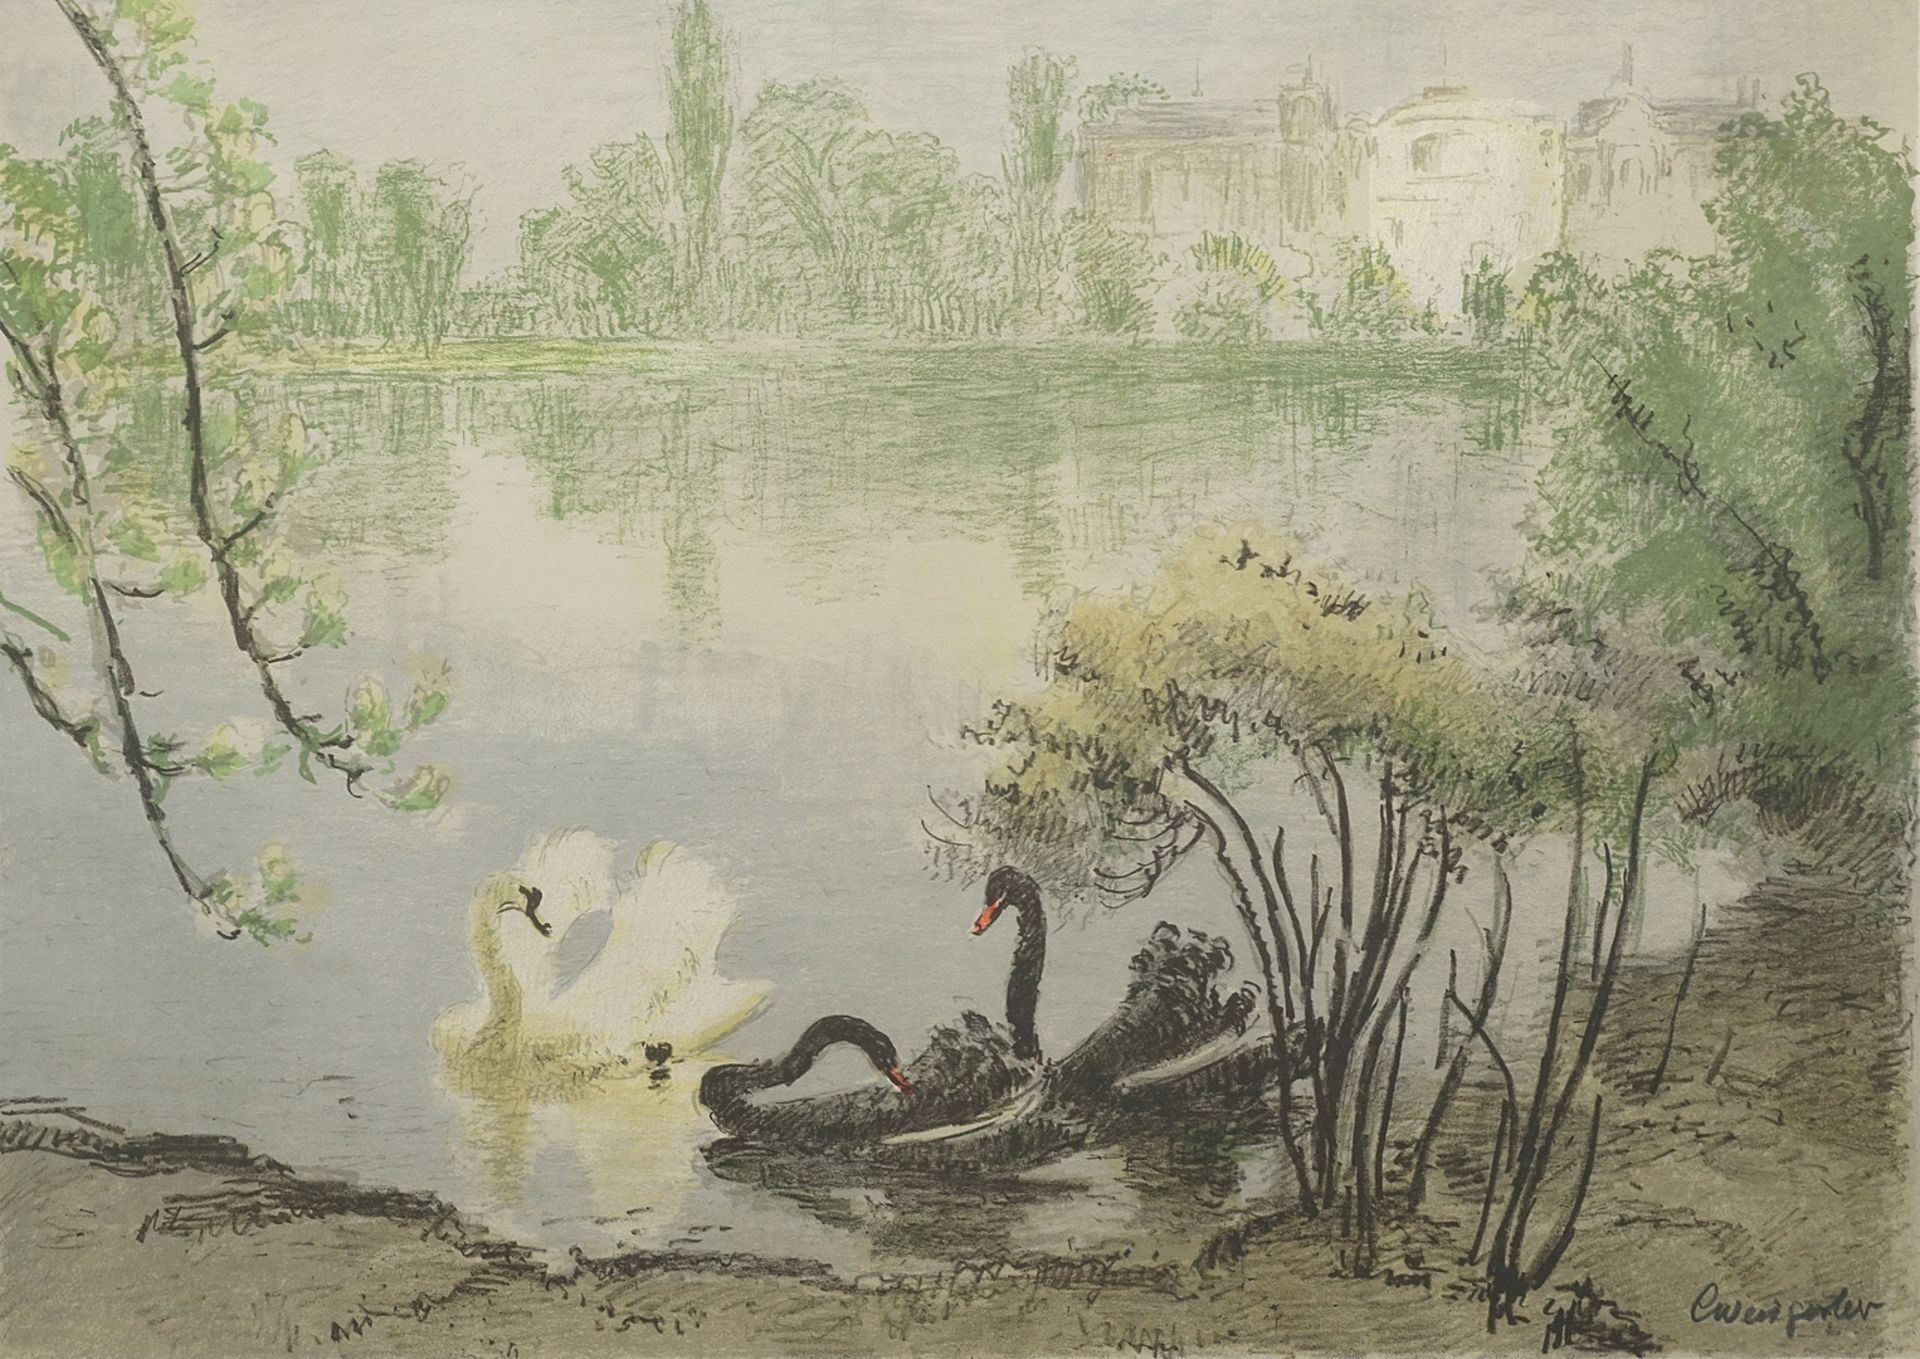 Carl Weisgerber (1891-1968), Swans on the pond